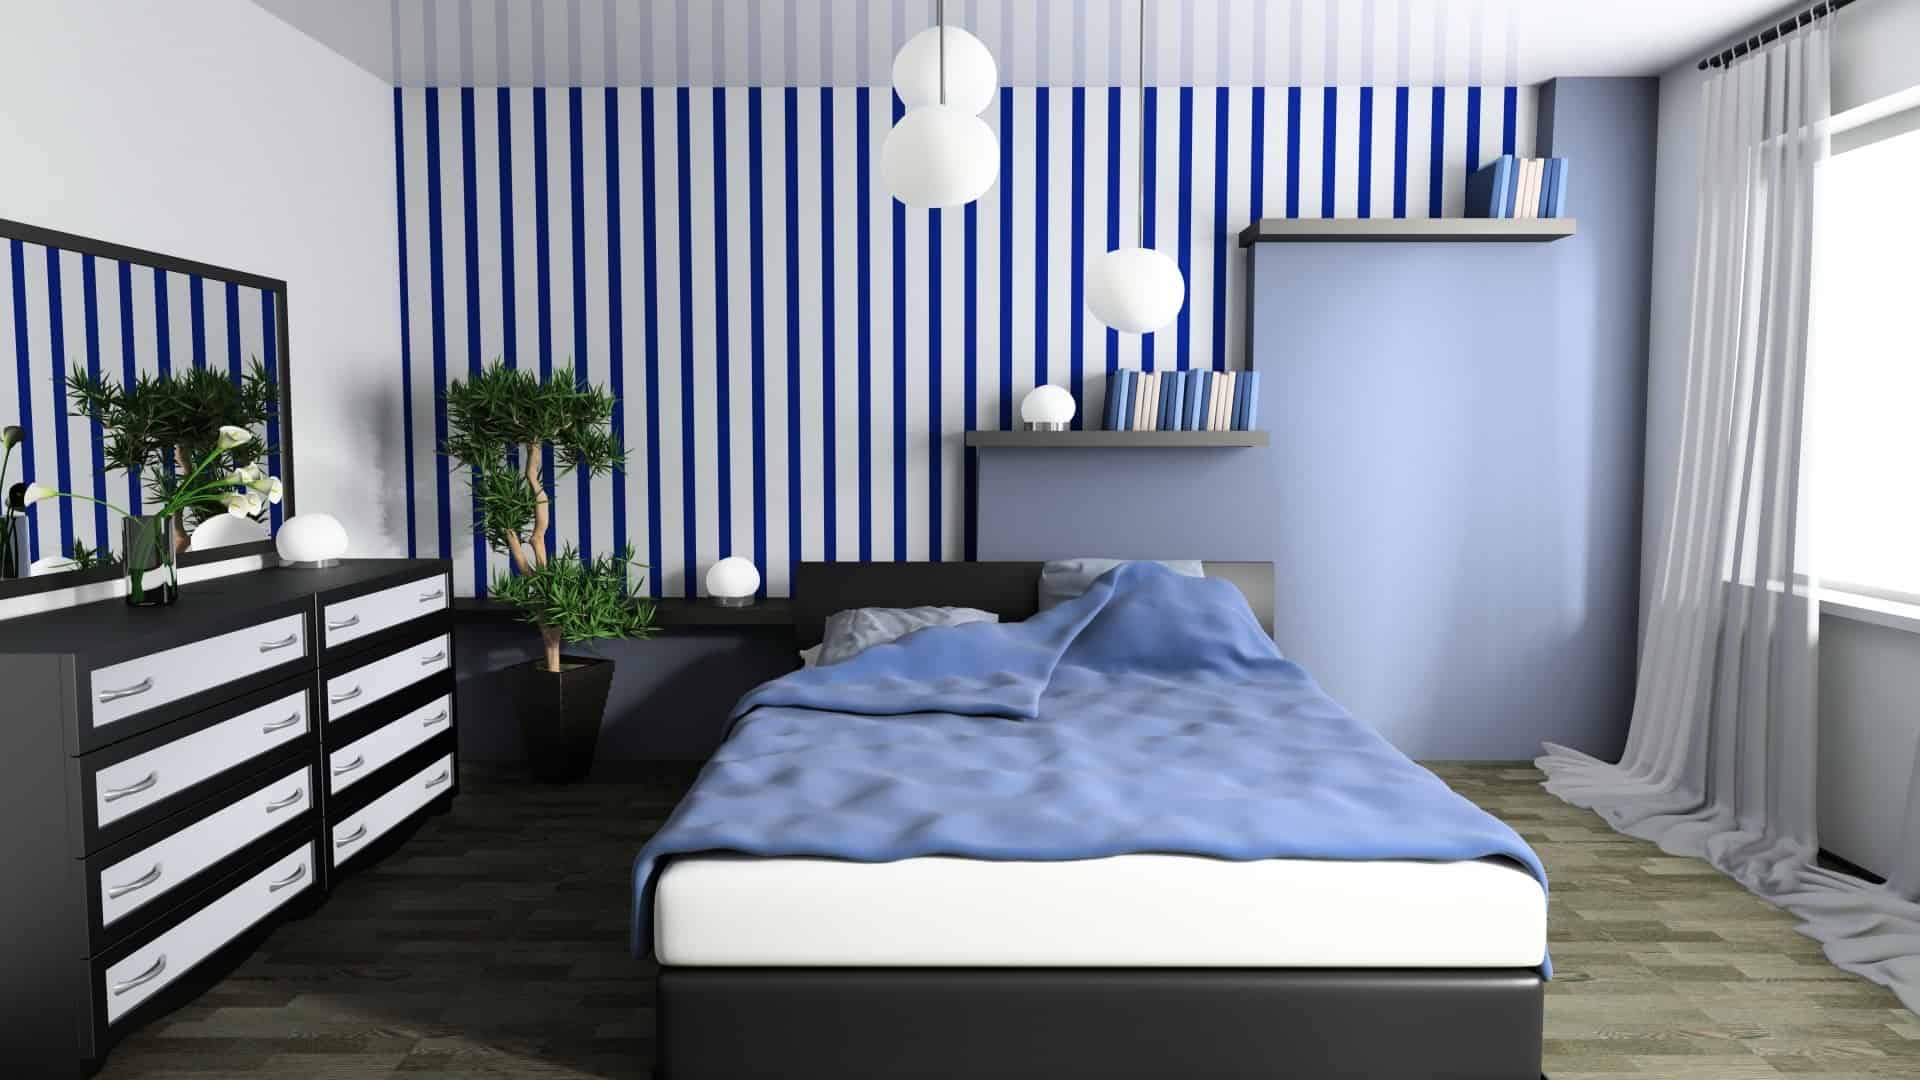 Can't decide on what blue pattern to add to a room?